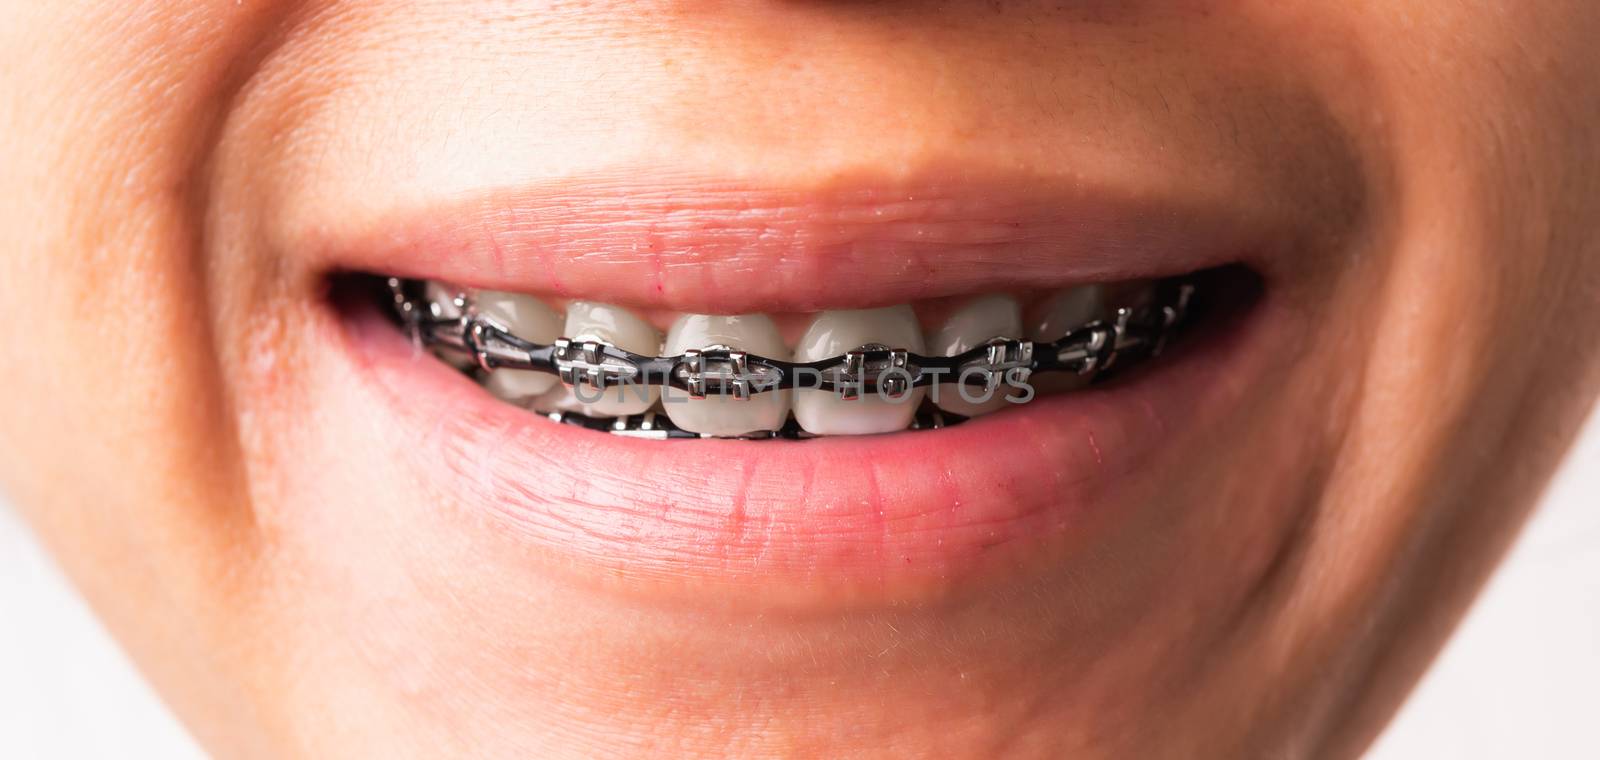 Woman smile show mouth with white teeth with black brackets brac by Sorapop